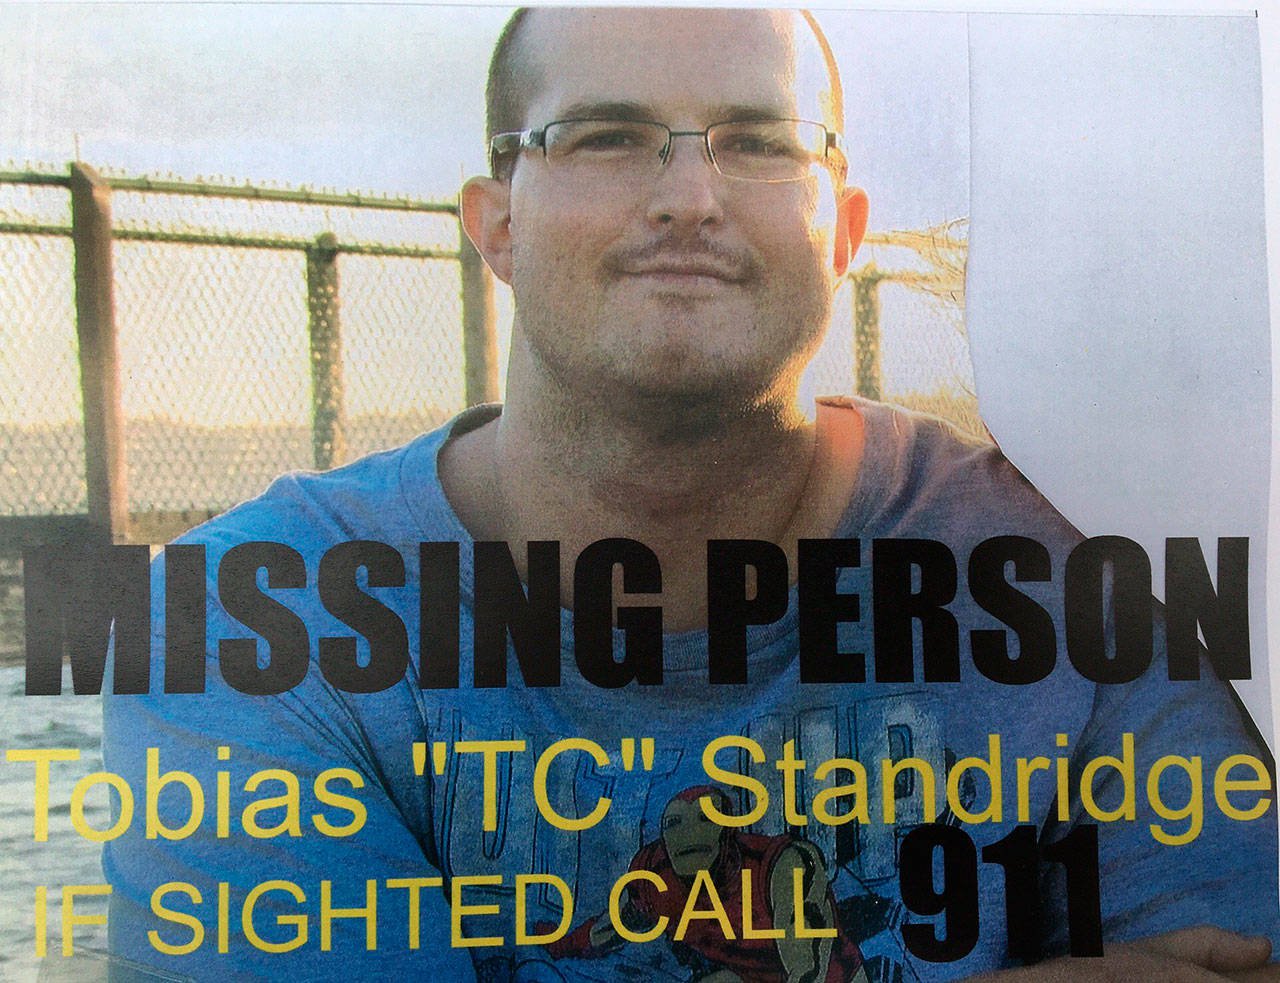 The Snohomish County Sheriff’s Office on March 4, 2018, was asking for help finding Tobias “TC” Standridge. He was last seen on foot near Stanwood. (Snohomish County Sheriff’s Office image)